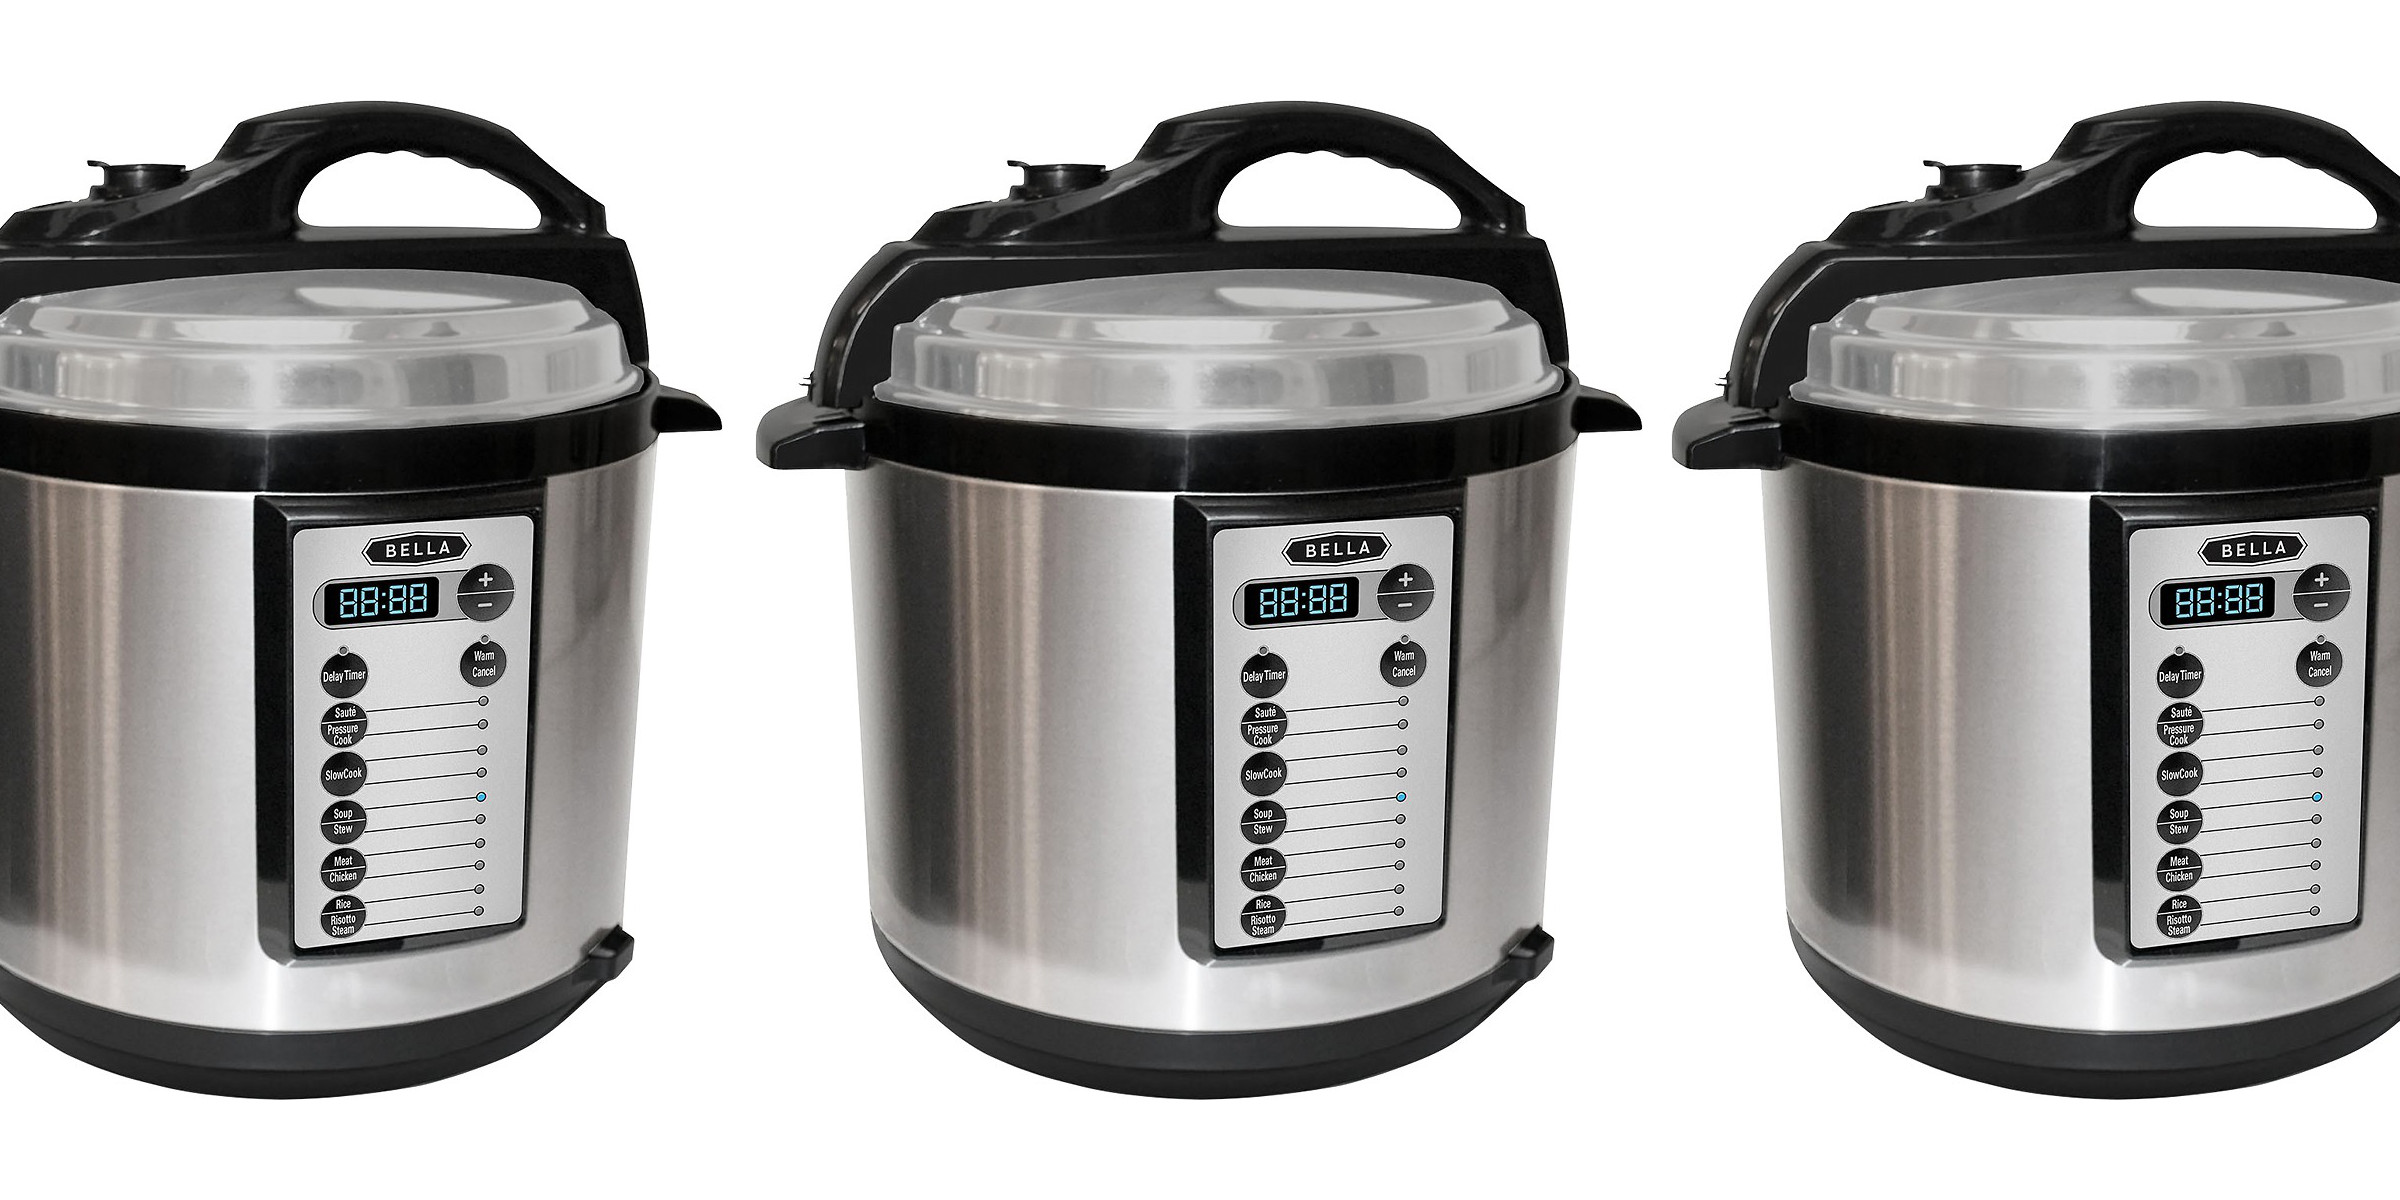 bella-6-quart-pressure-cooker-drops-to-40-shipped-for-today-only-at